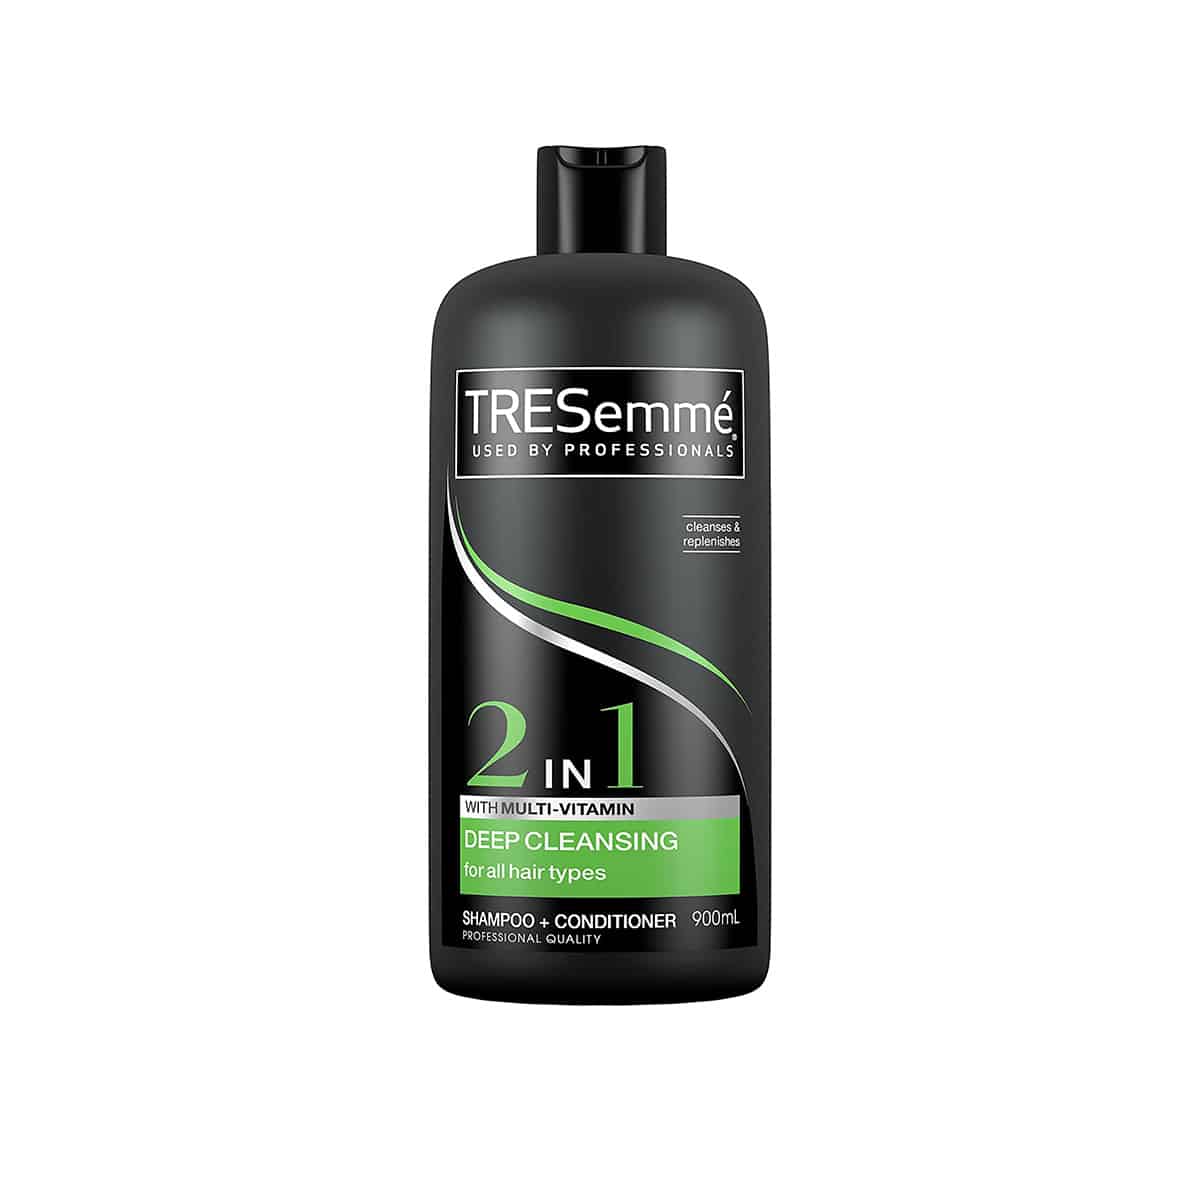 Tresemmé Deep Cleansing 2 In 1 Shampoo And Conditioner 900ml I Scent 2977